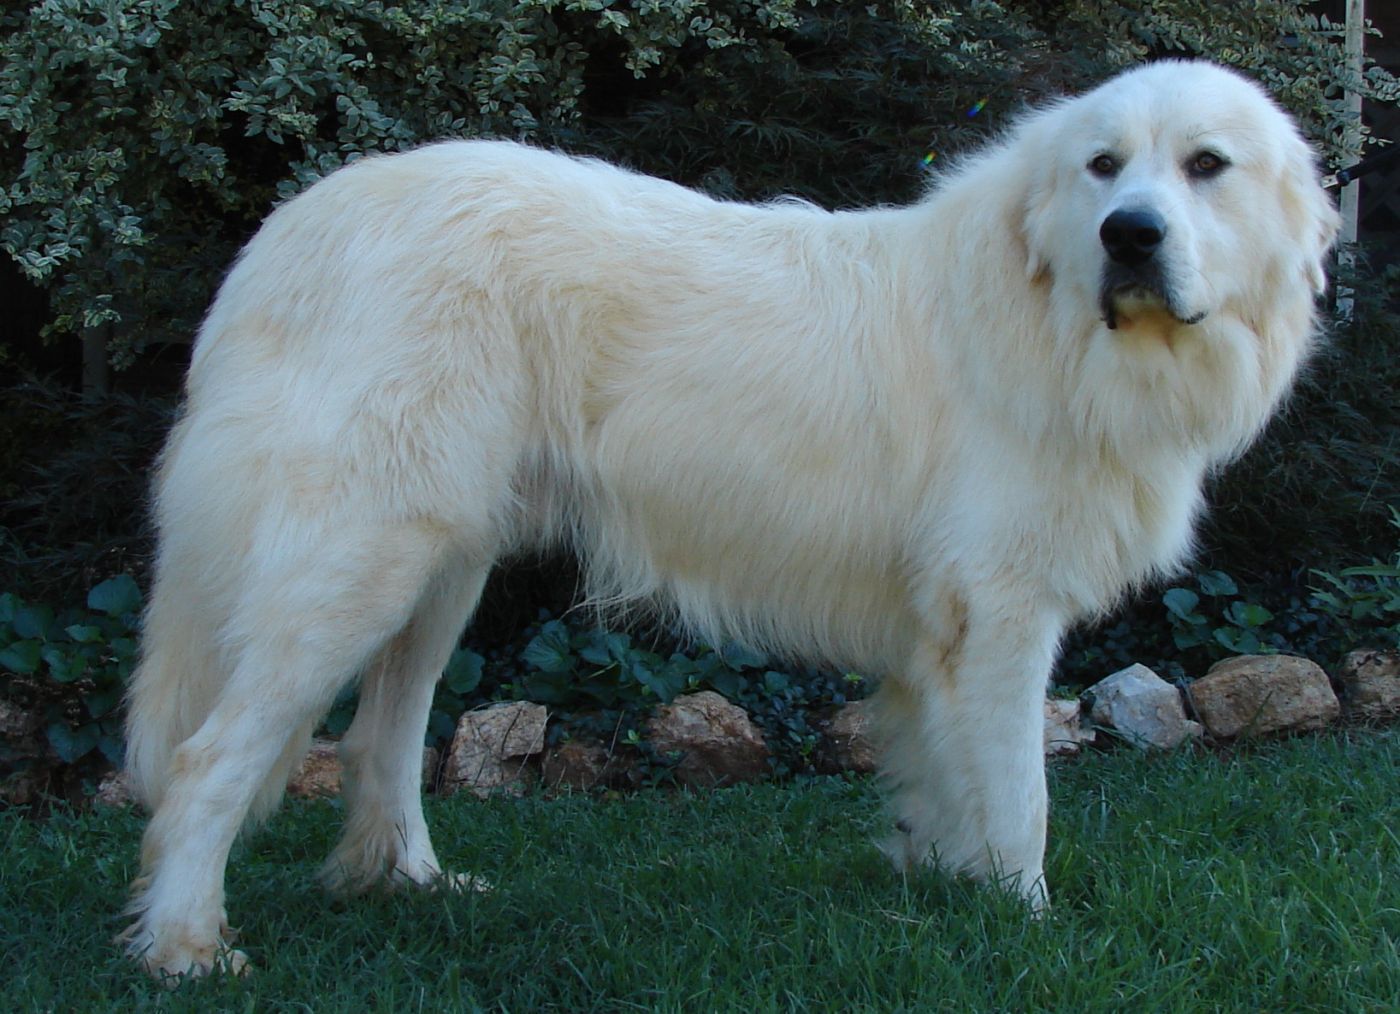 The Great Pyrenees are a Great Dog for Tall People